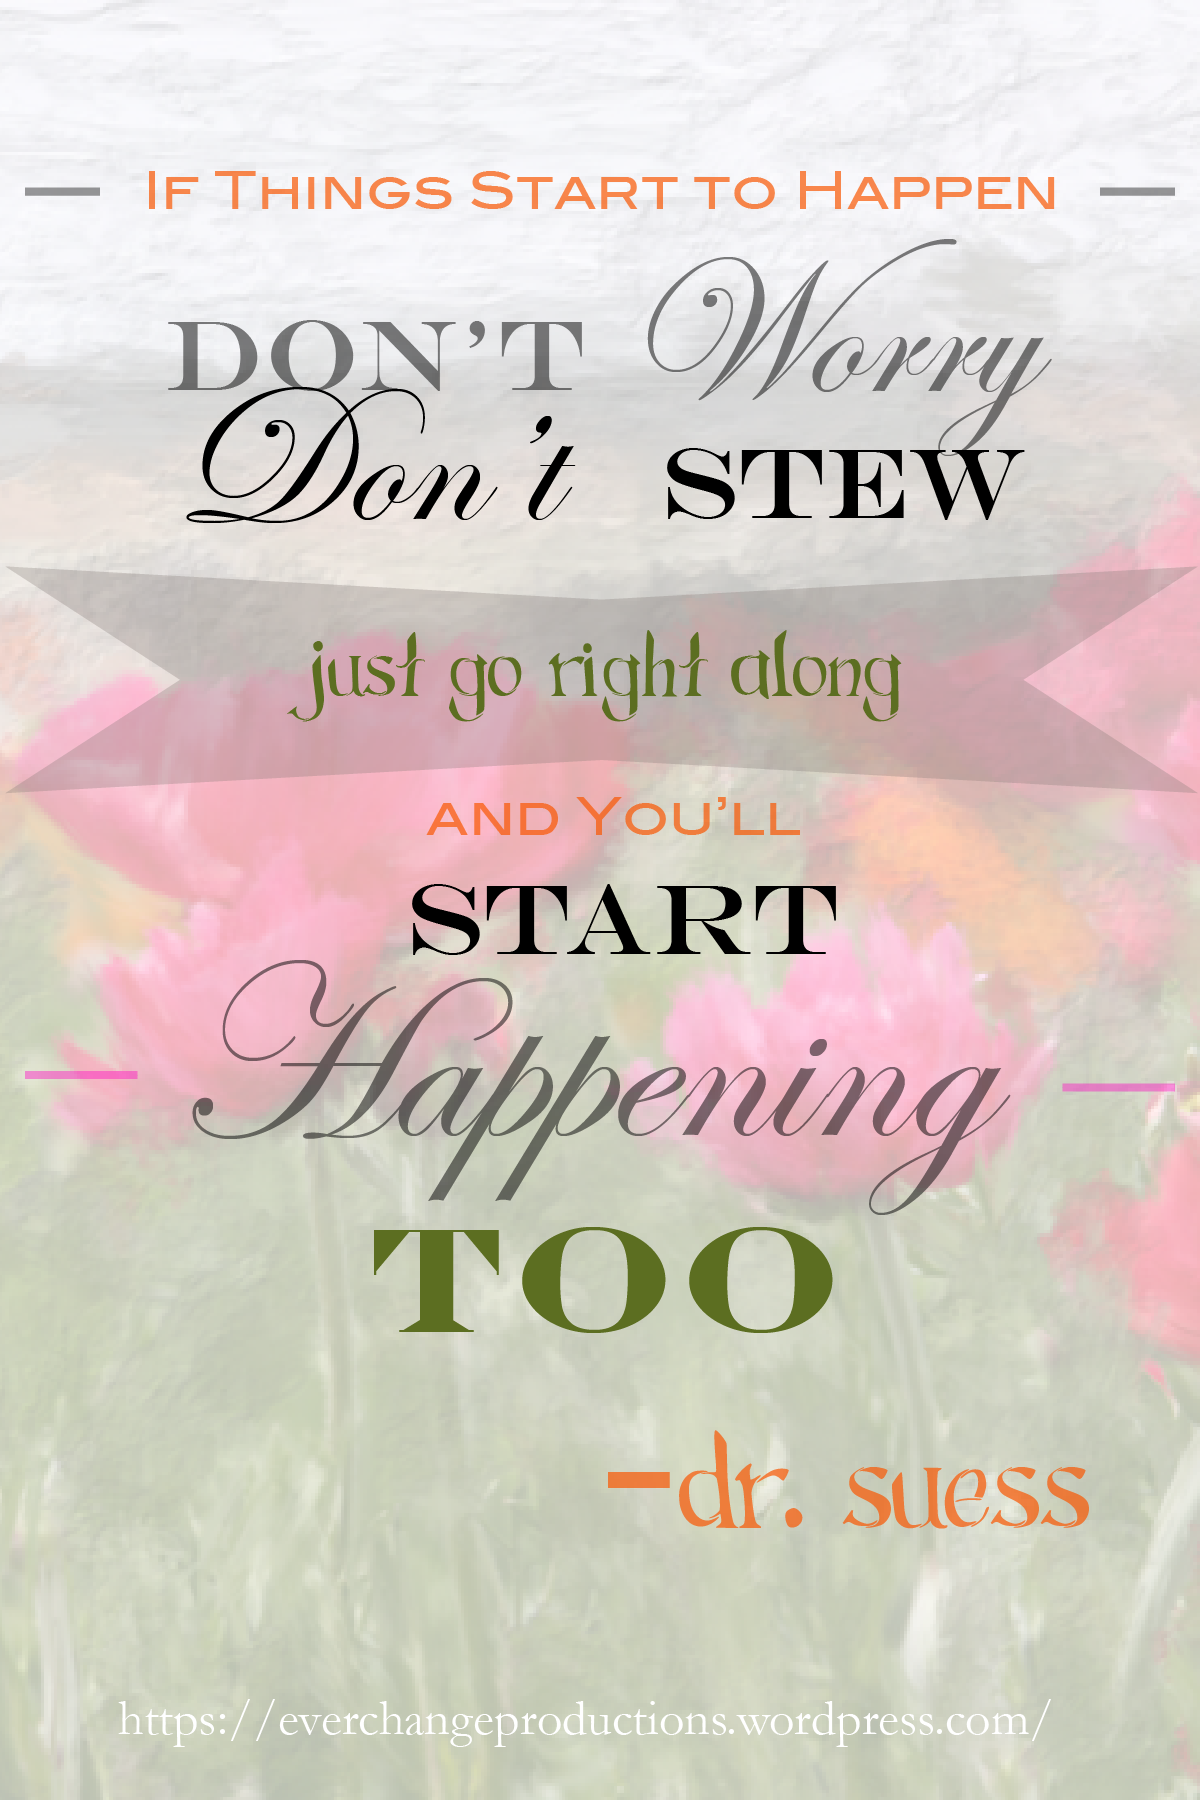 “If things start to happen, don't worry, don't stew, just go right along and you'll start happening too.” -Dr. Suess motivational quote